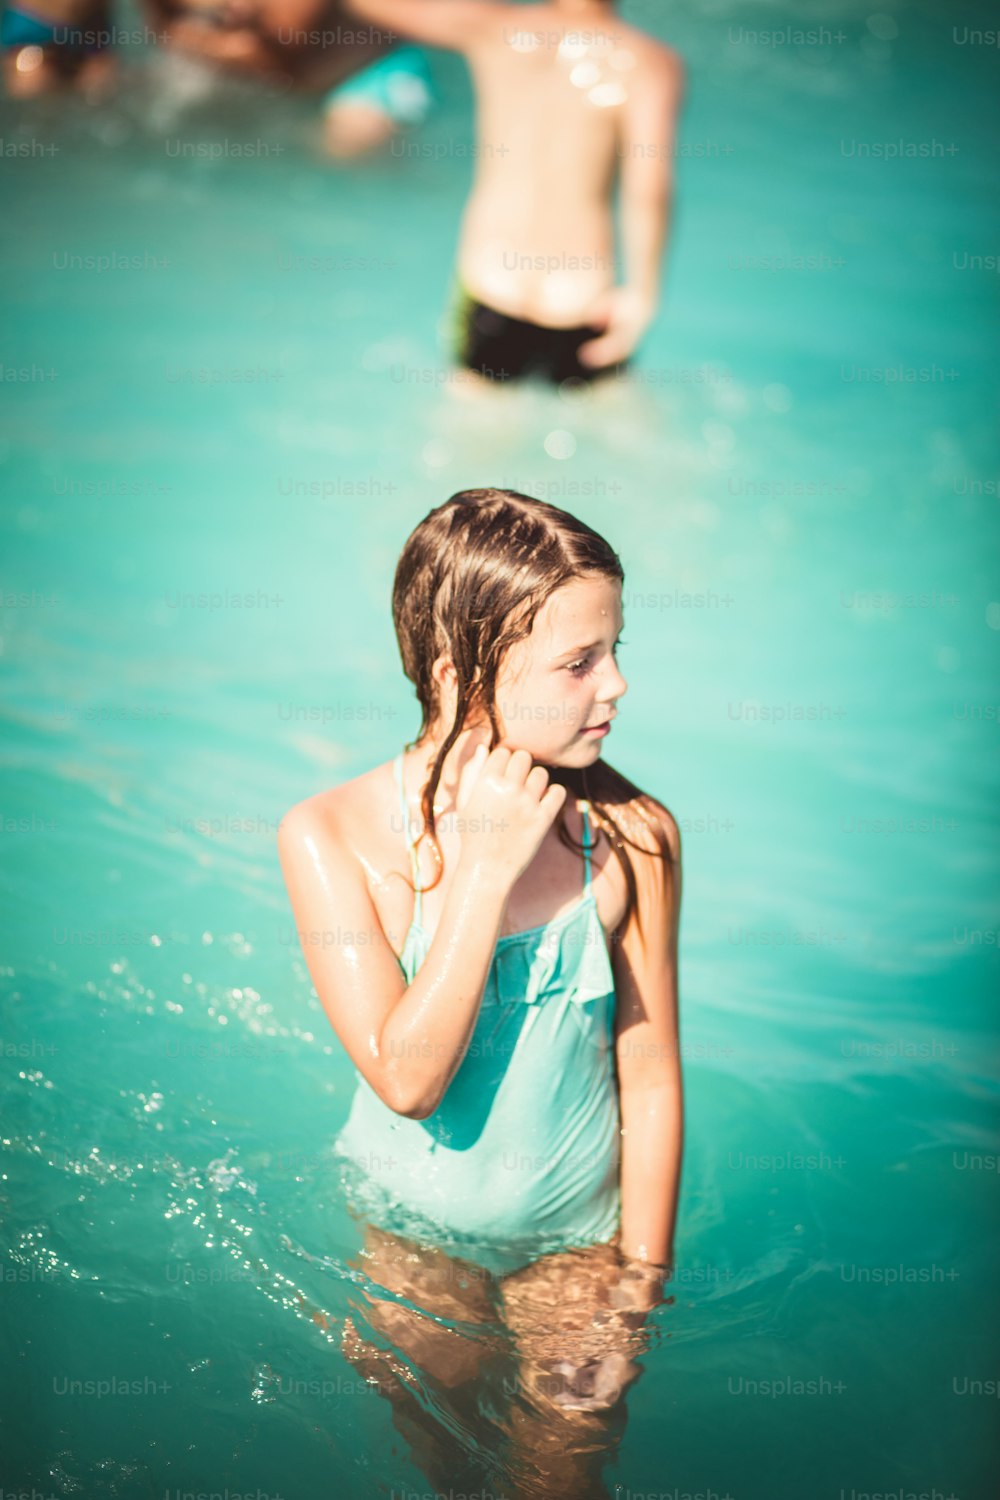 The best days are summer days. Child in water.